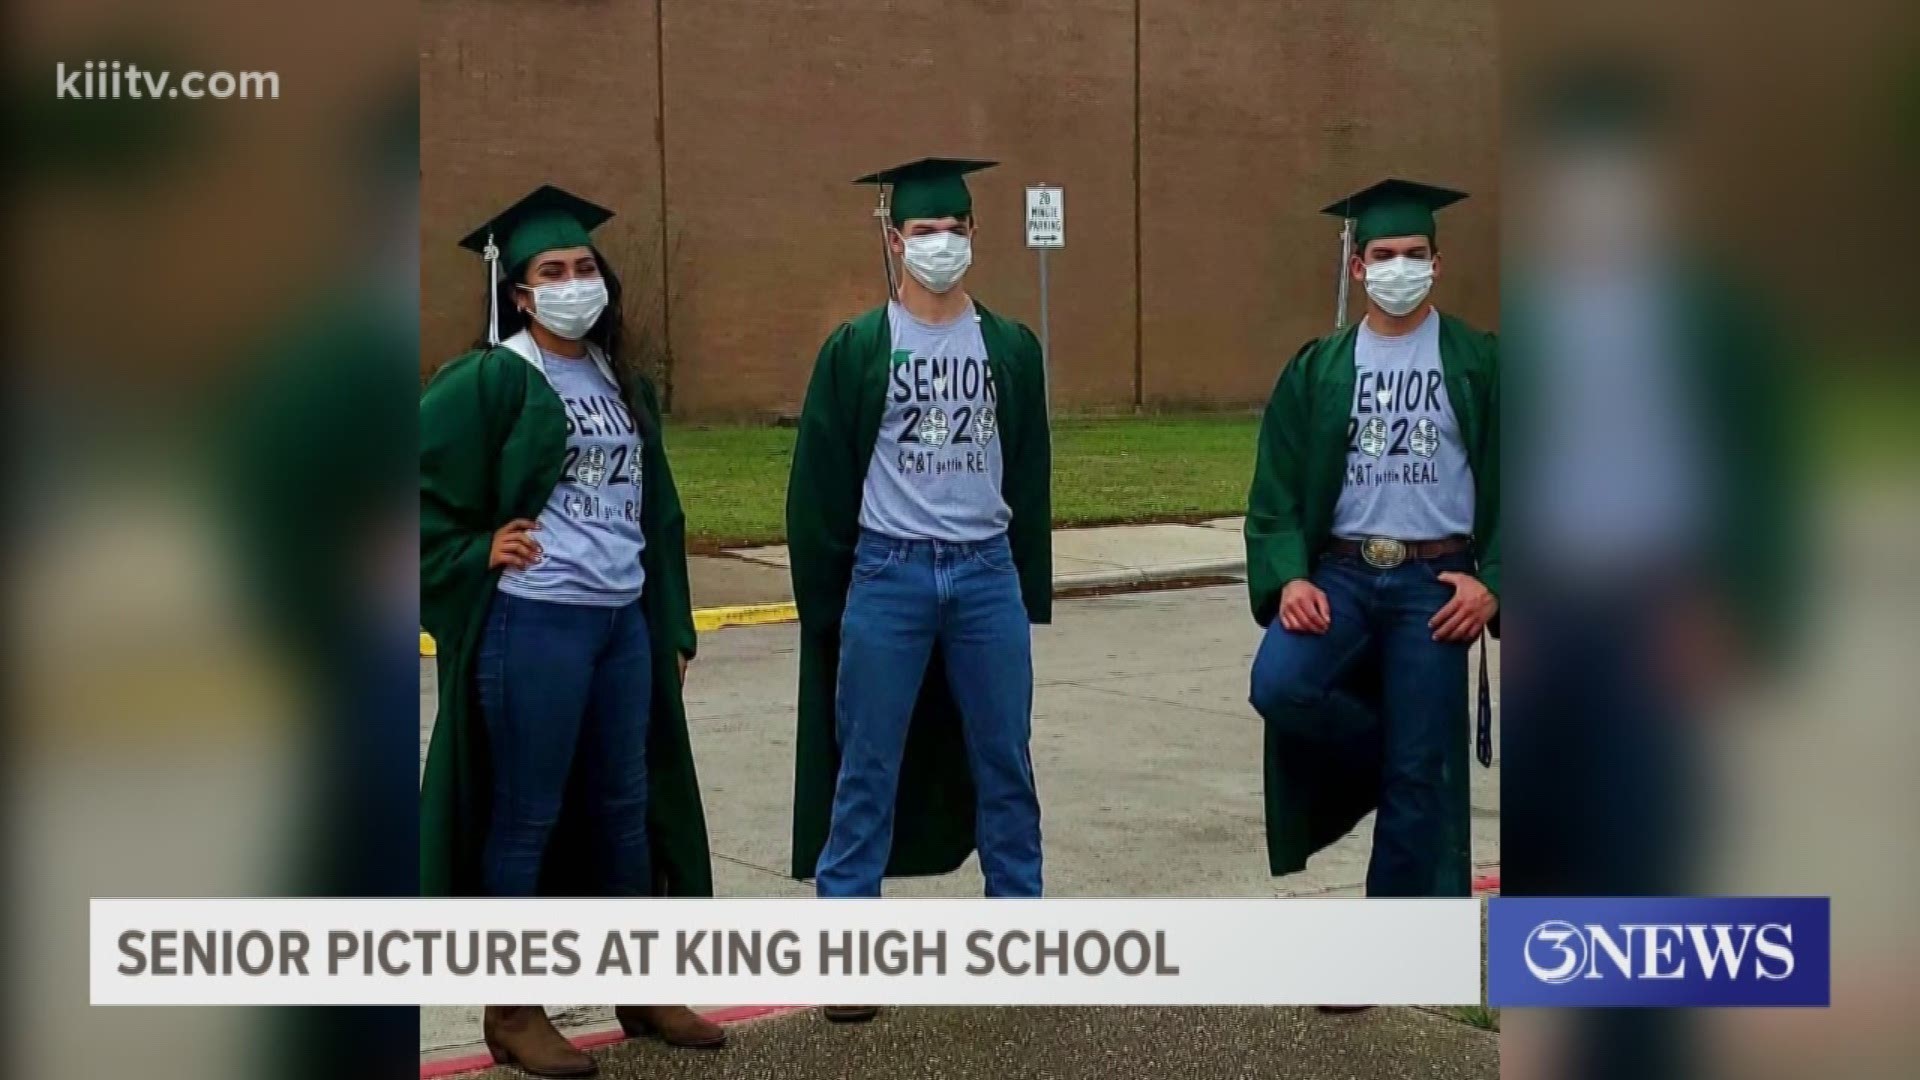 Seniors at King High School took their graduation pictures wearing face masks to capture the coronavirus crisis they're facing.